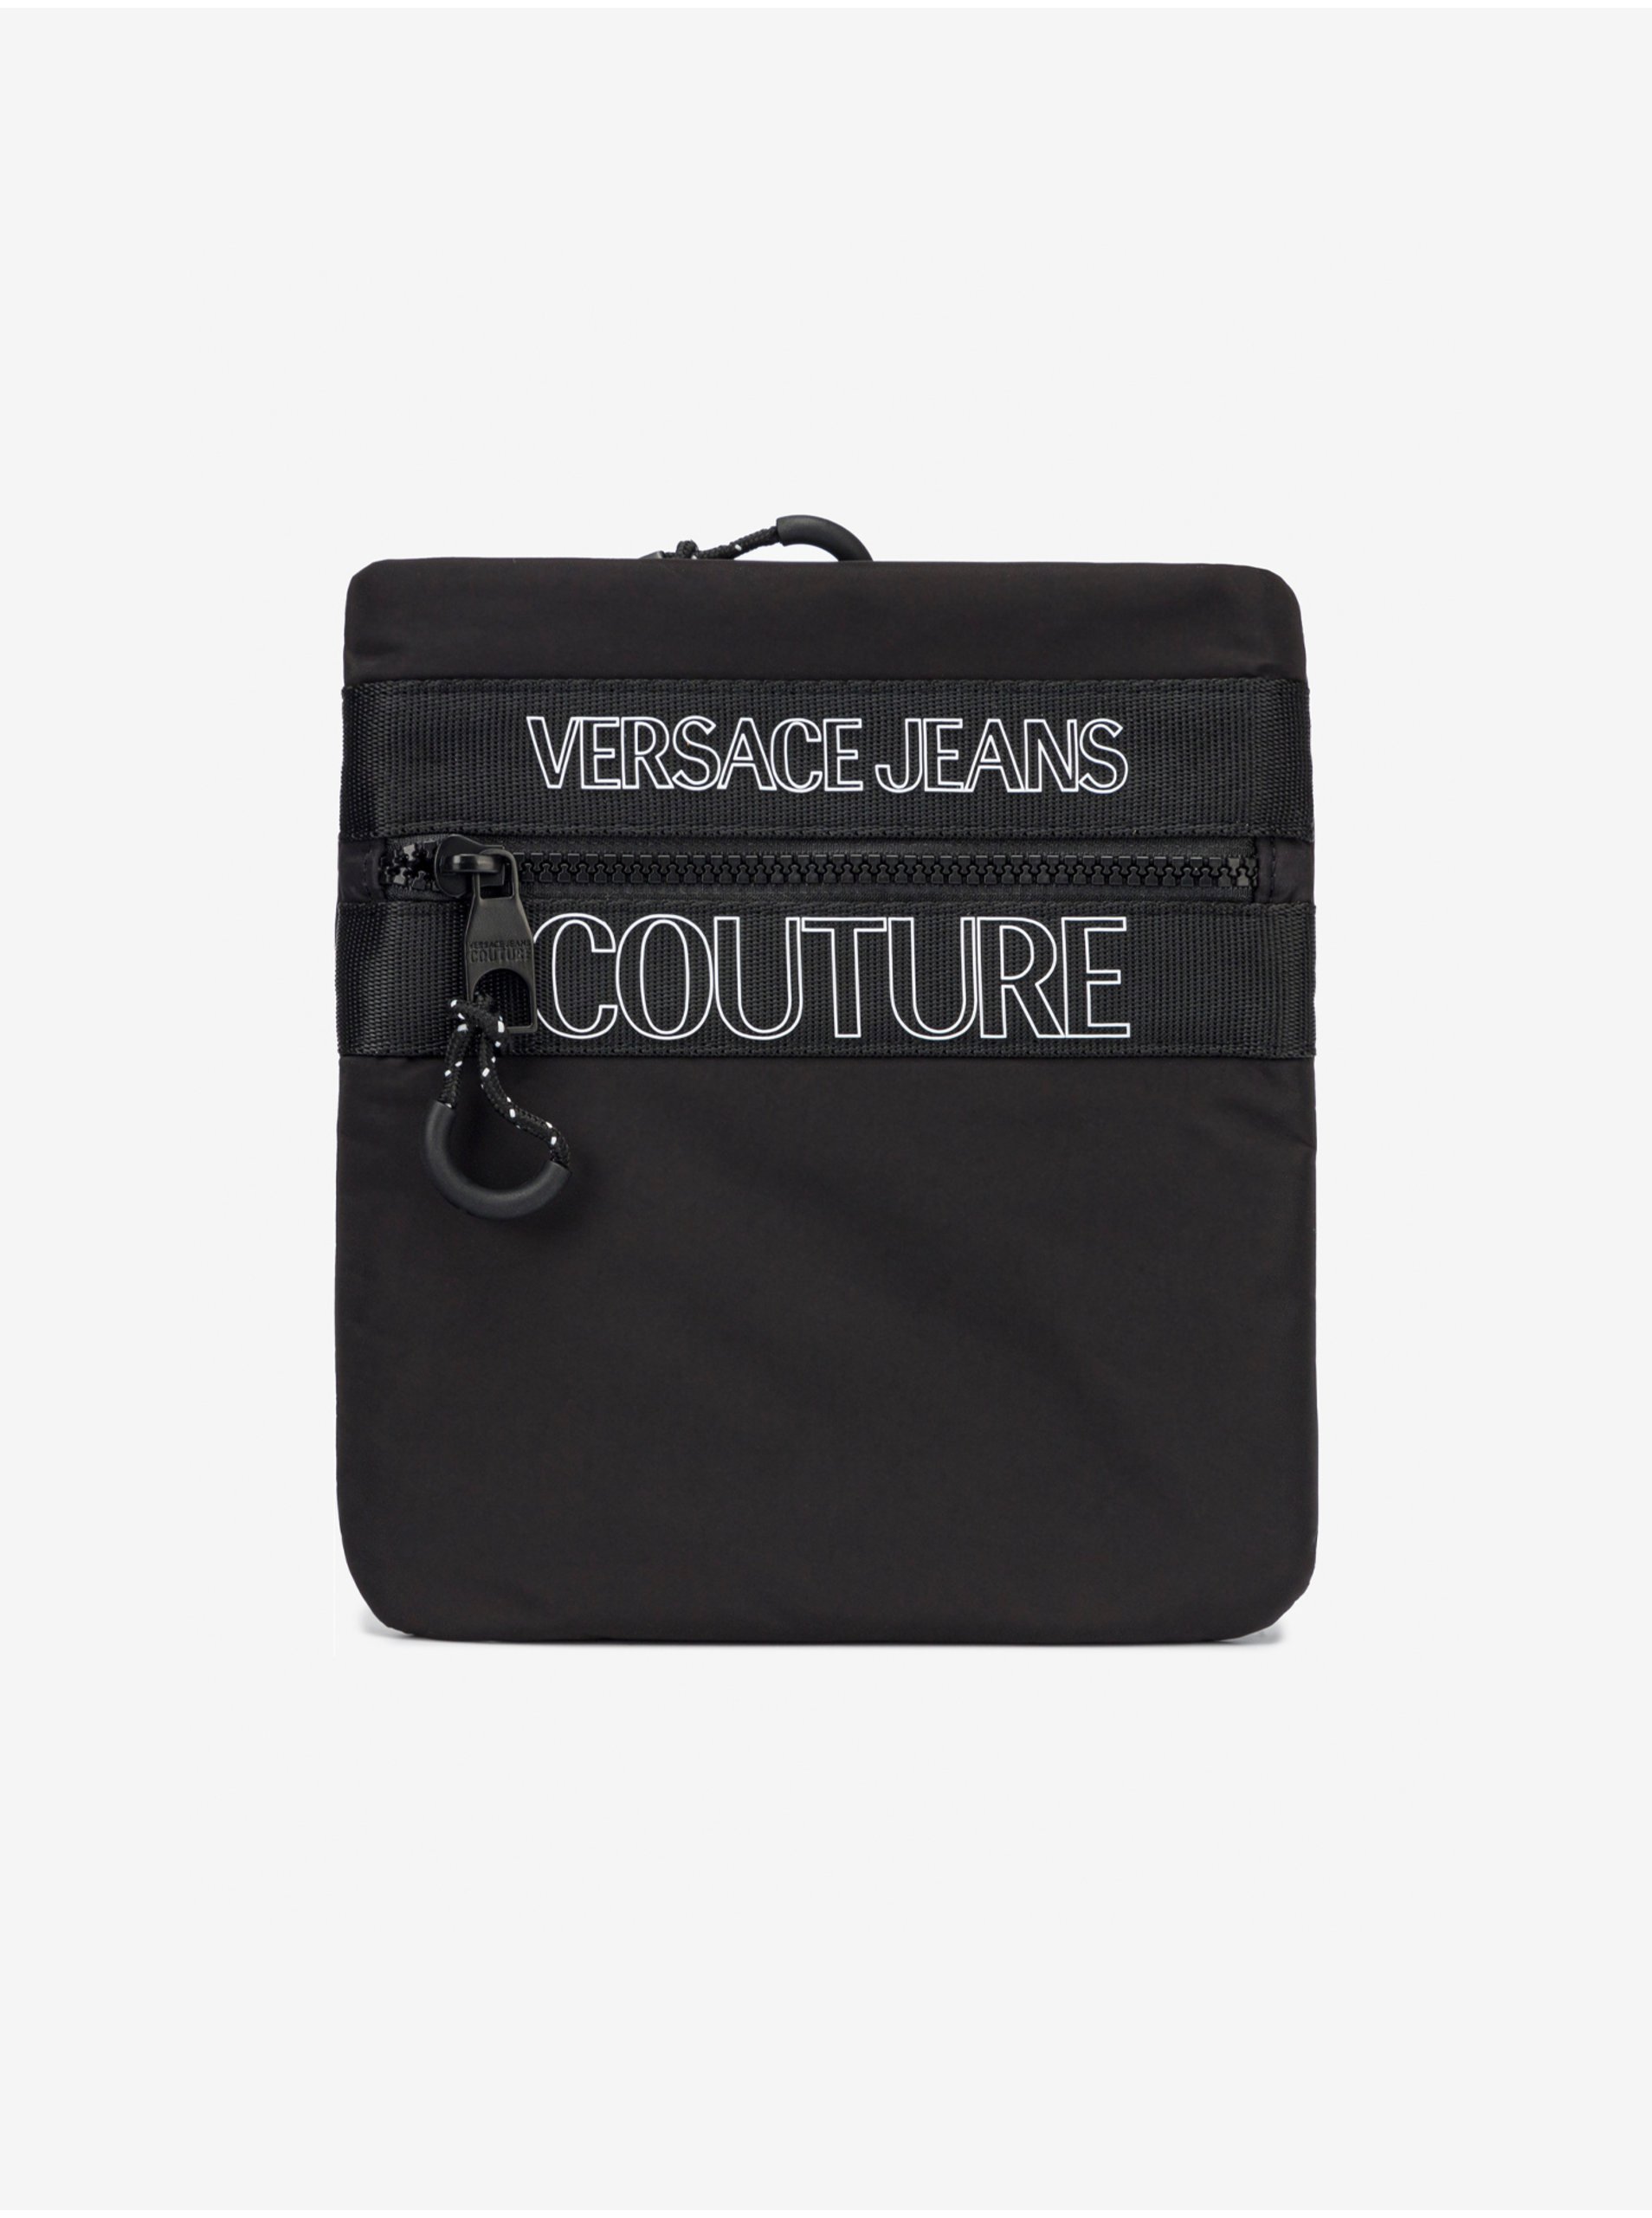 Lacno Cross body bag Versace Jeans Couture